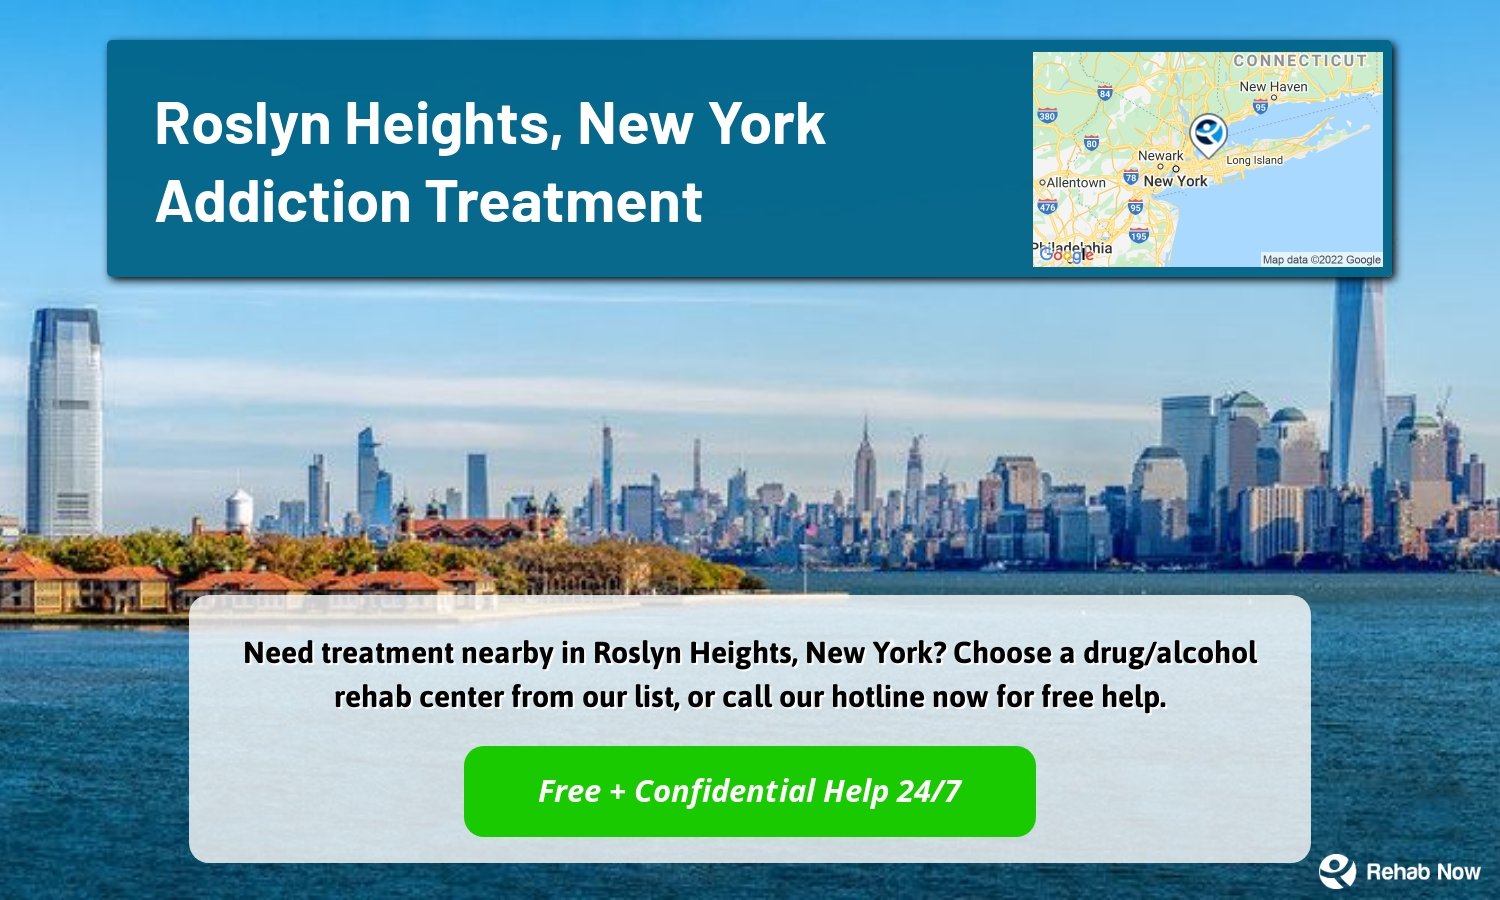 Need treatment nearby in Roslyn Heights, New York? Choose a drug/alcohol rehab center from our list, or call our hotline now for free help.